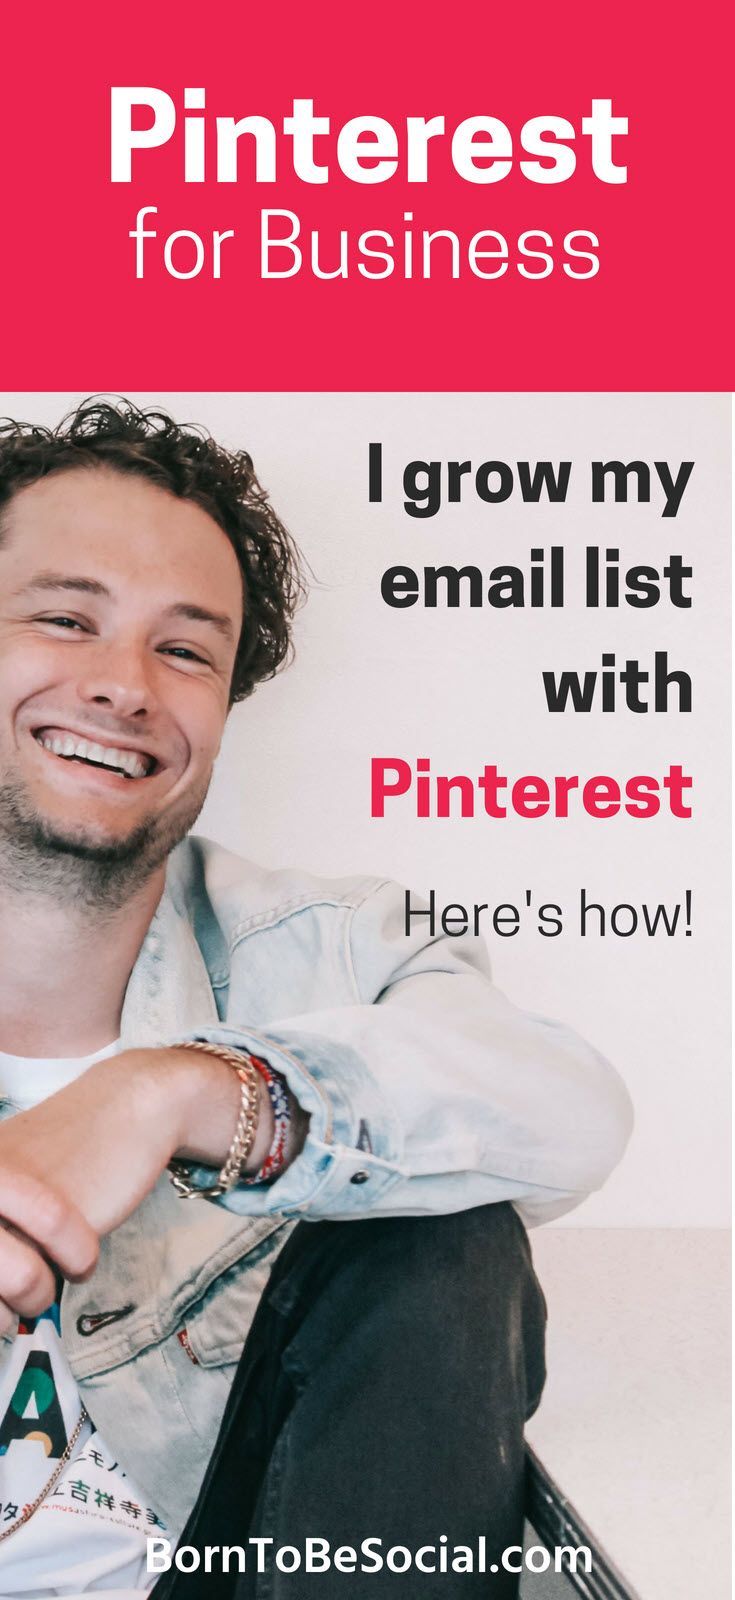 How to grow your email list with Pinterest - Find out how to get targeted visitors to sign up for your mailing list for free! Build your e-mail list with Pinterest. #pinteresttips #digitalmarketing #marketing #borntobesocial